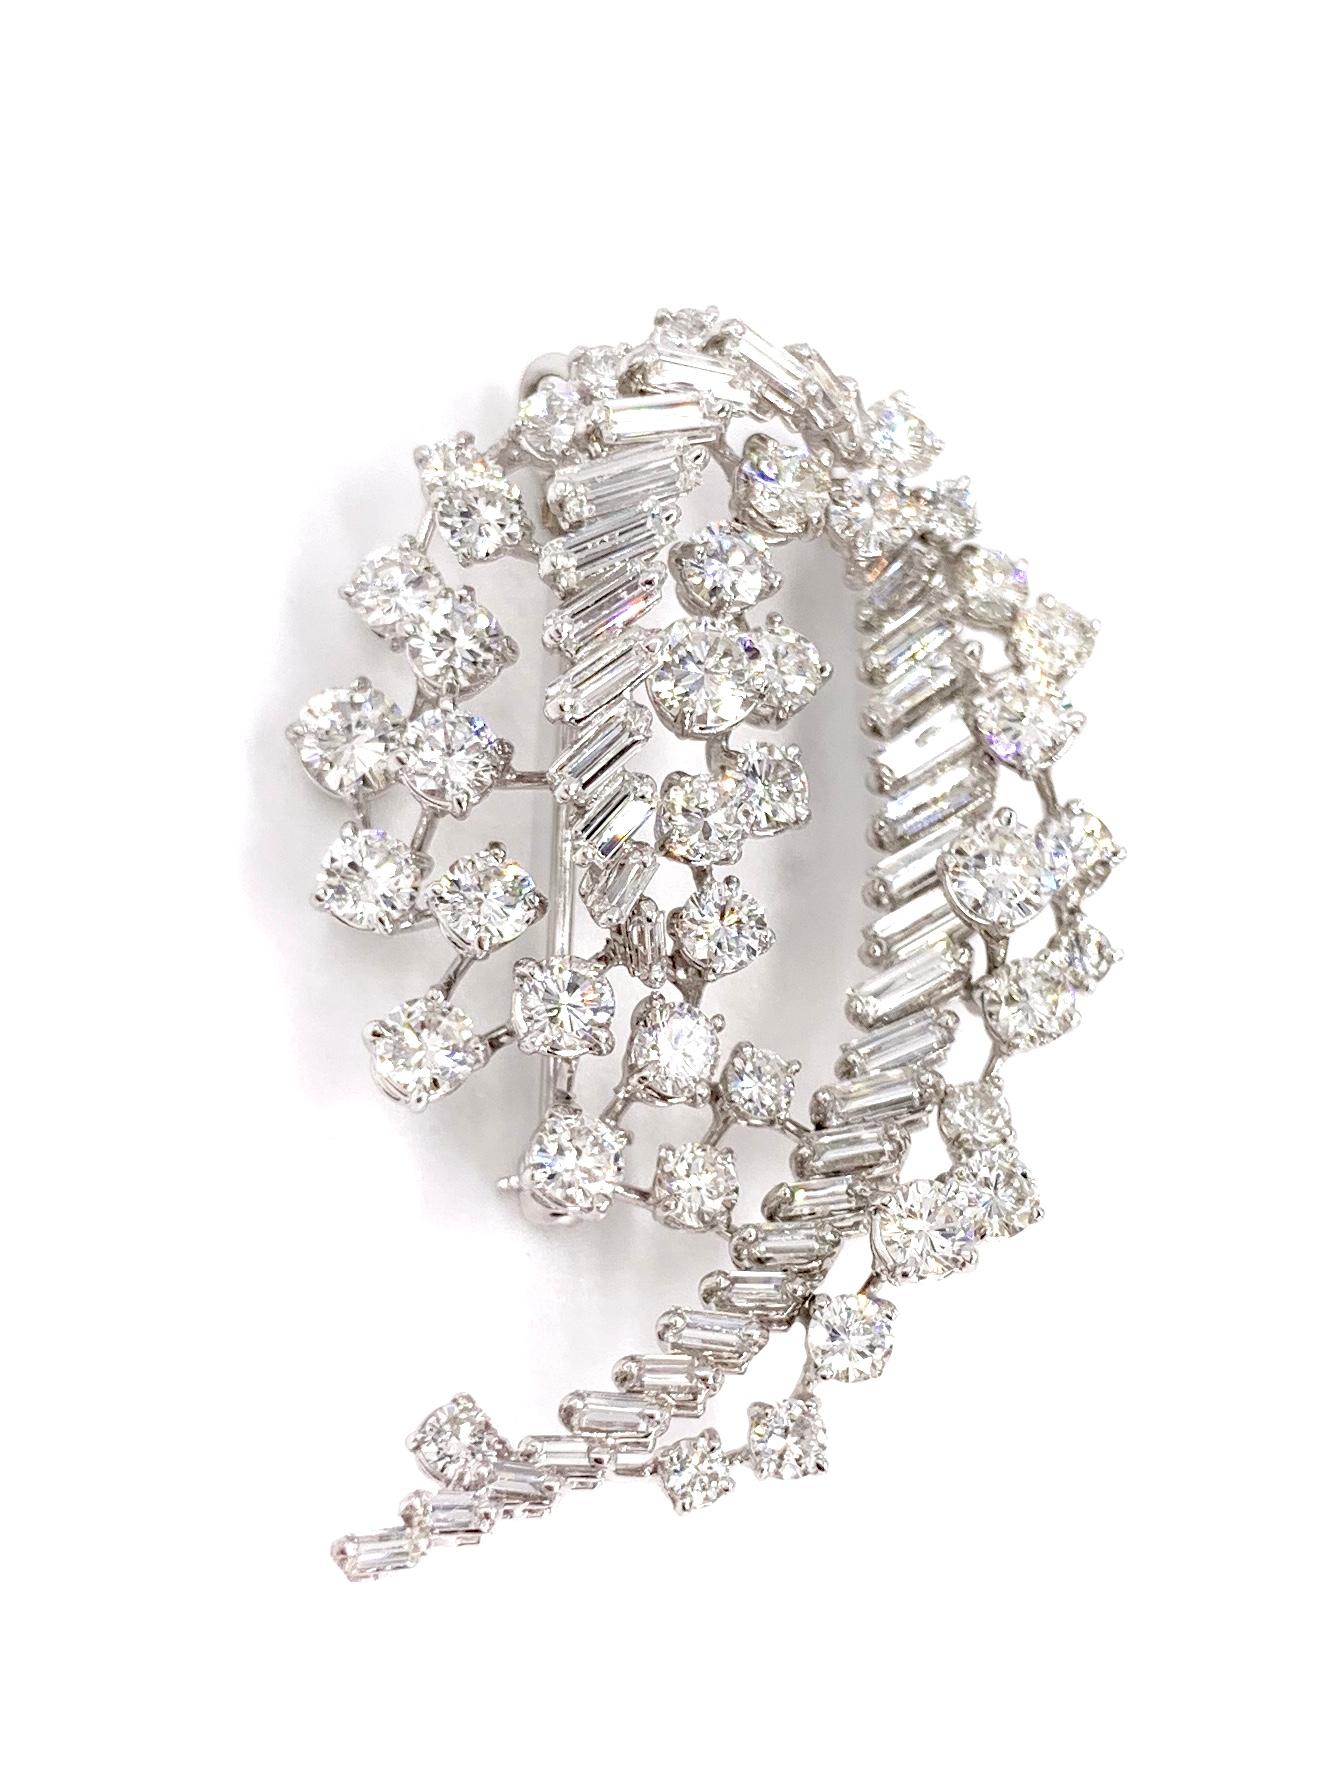 Designed in France, this exquisite 18 karat white gold diamond spray brooch doubles as a slide pendant. Swirl designed piece features approximately 6.50 carats of high quality round brilliant and baguette cut diamonds. Diamond quality is